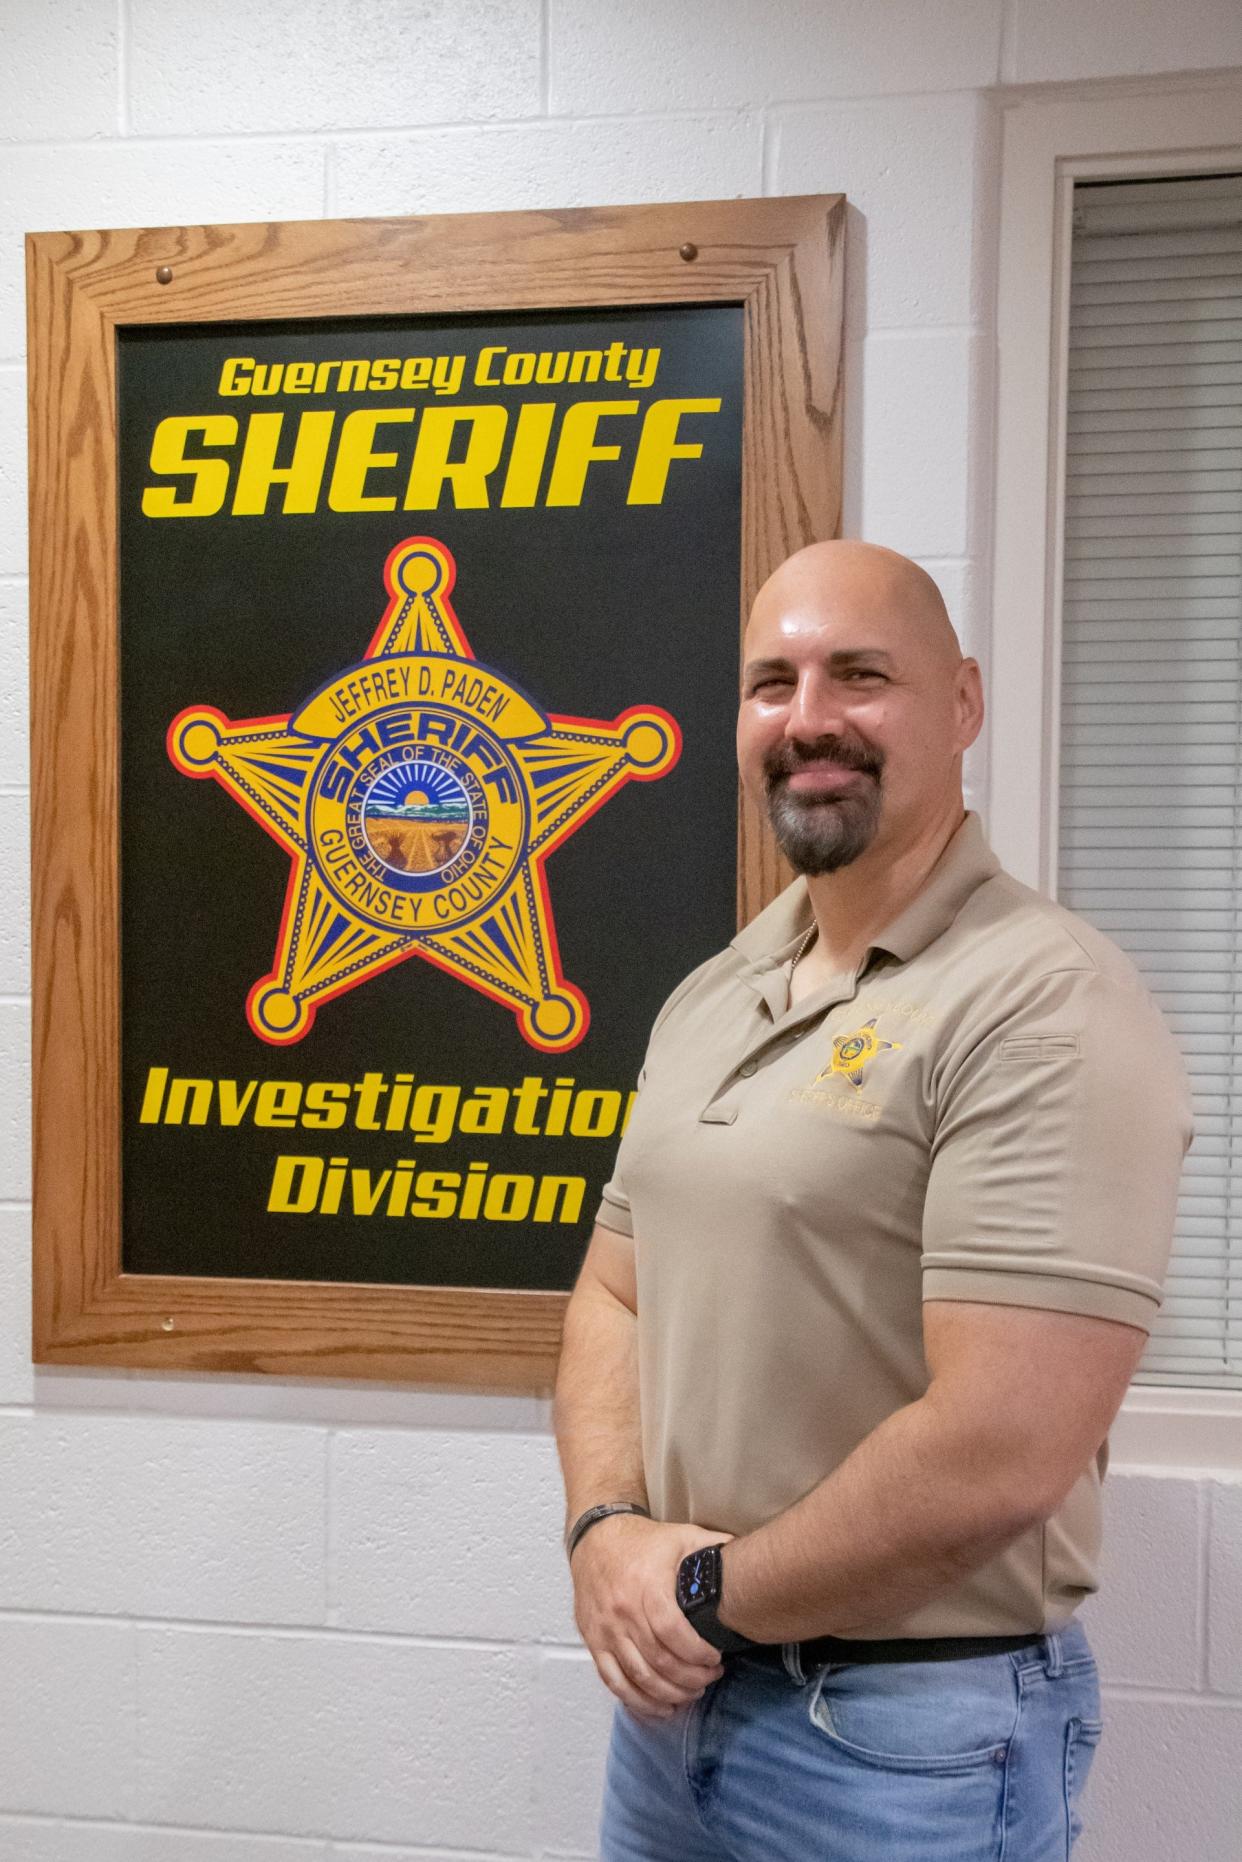 Lt. Sam Williams with the Guernsey County Sheriff's Office